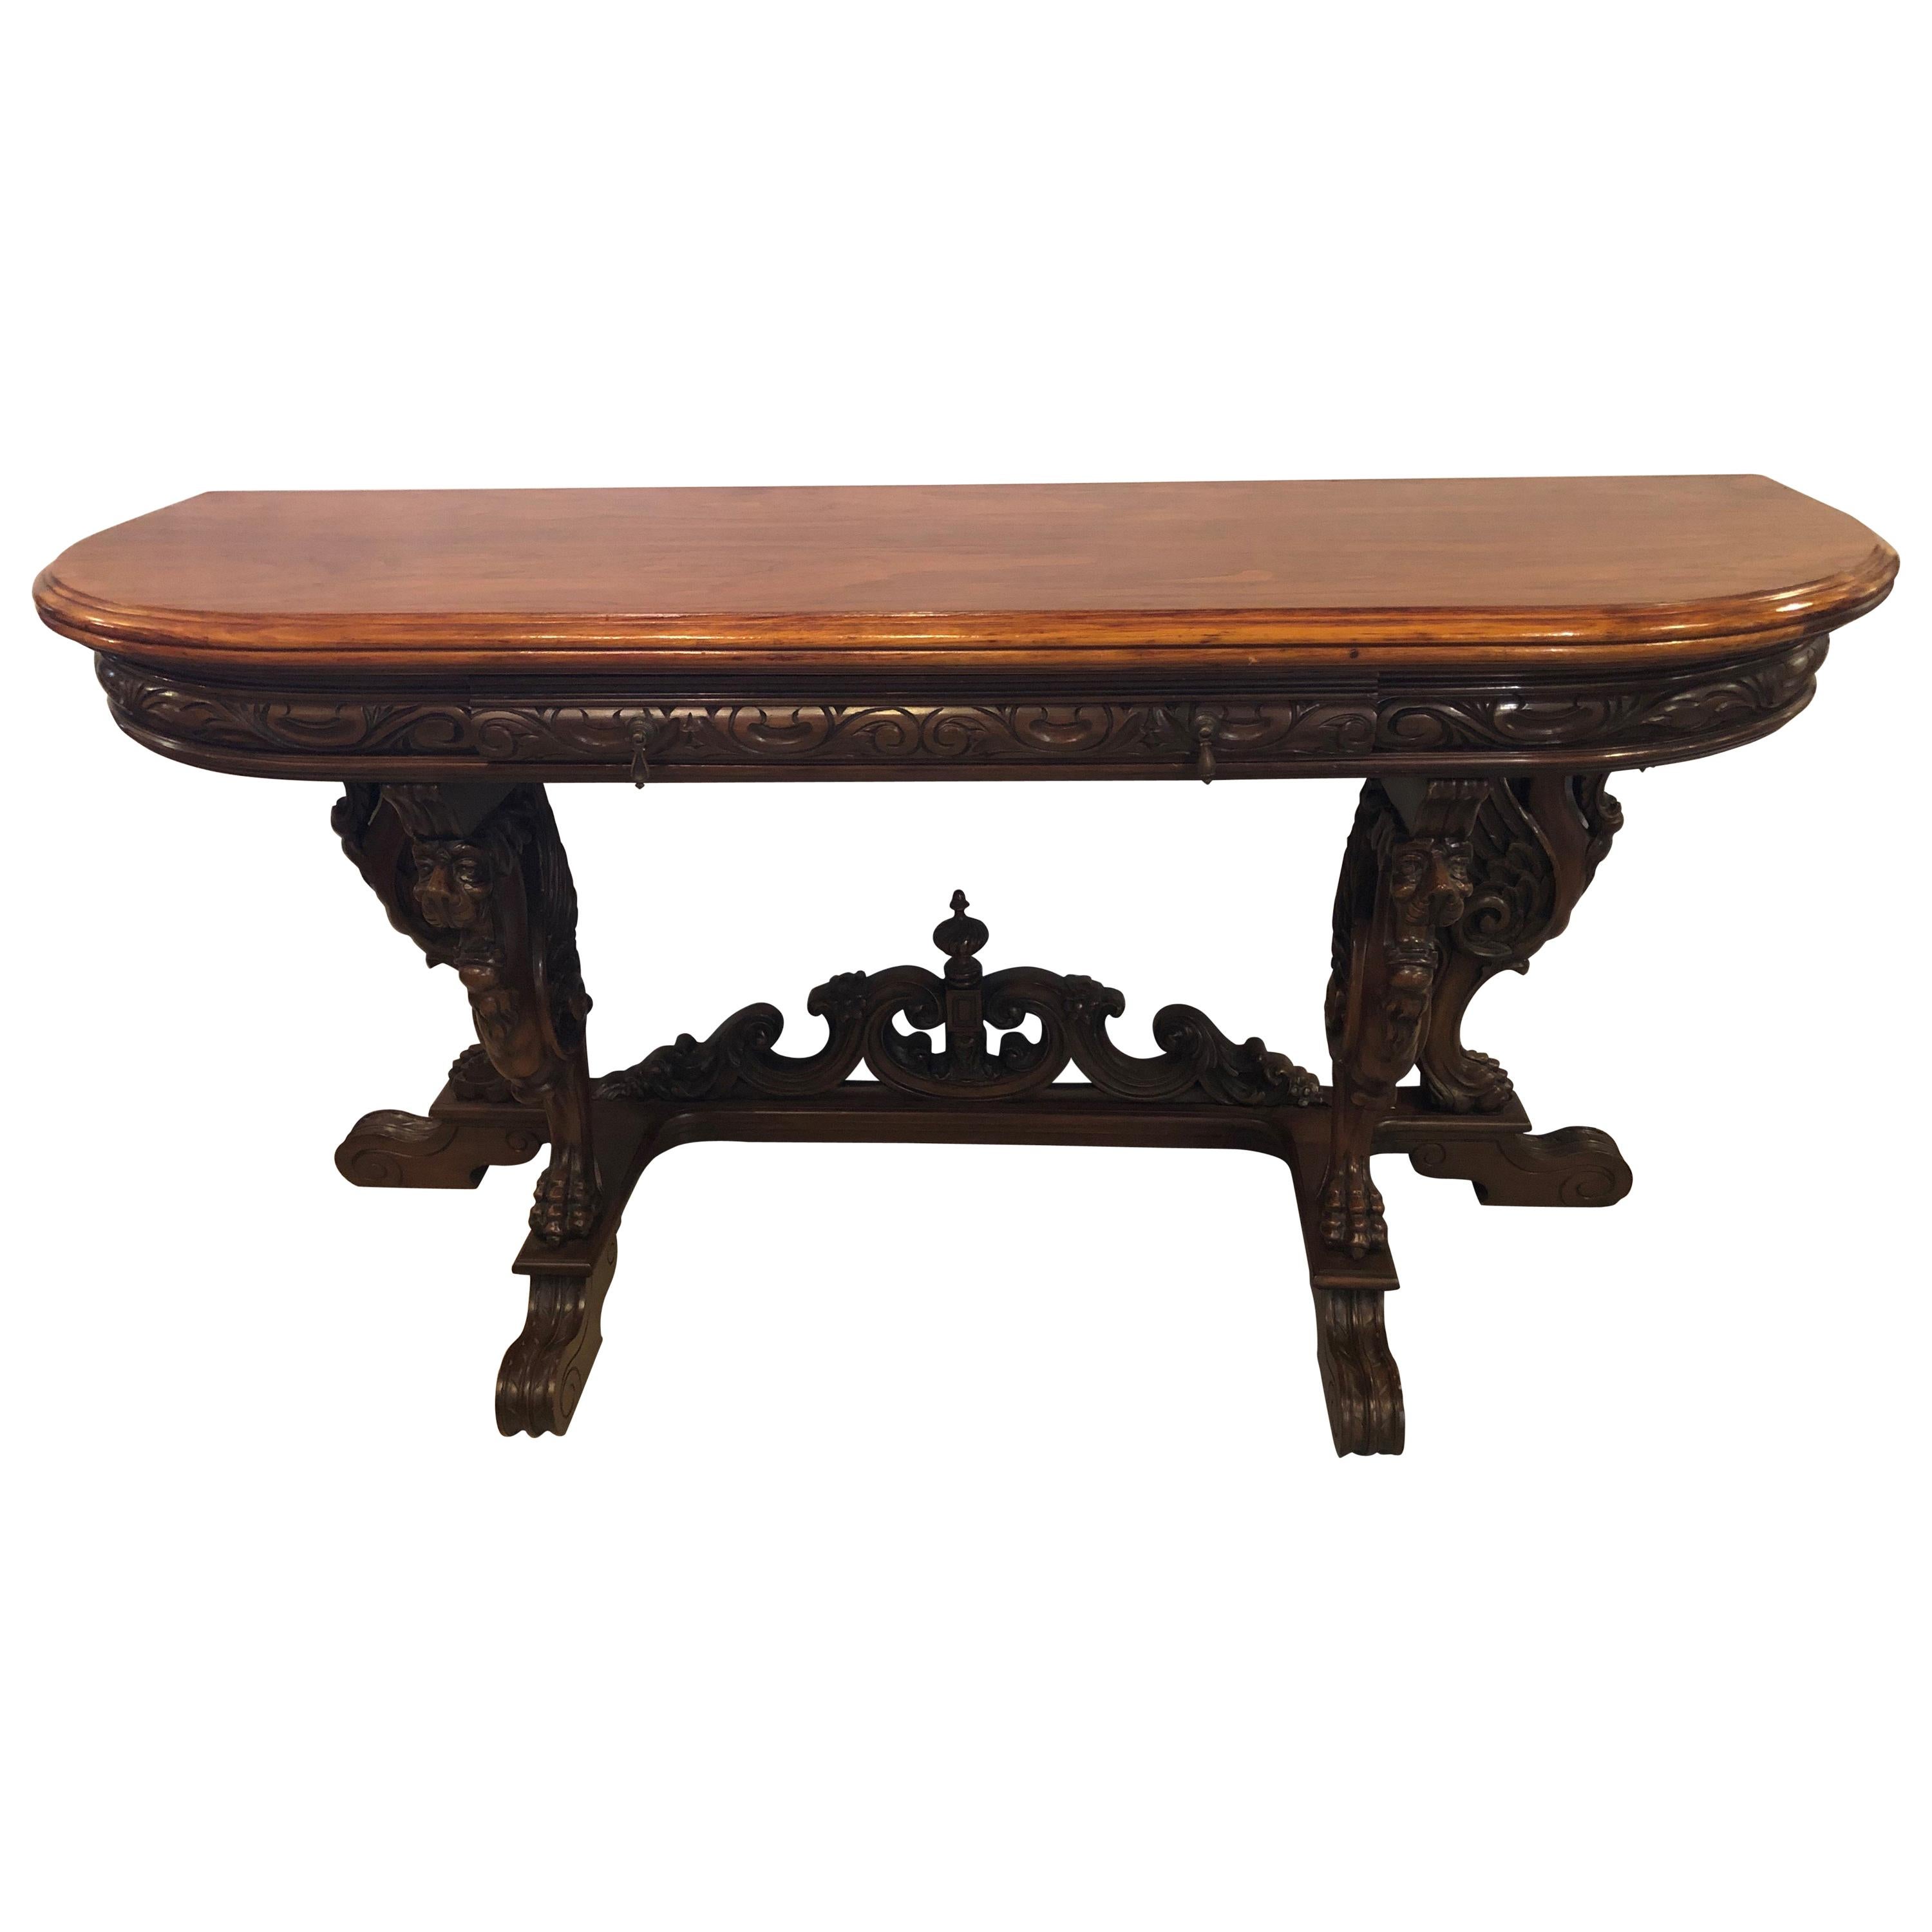 Horner Brothers Quality Flip Top Dining Table with 4 Full Bodied Winged Griffins